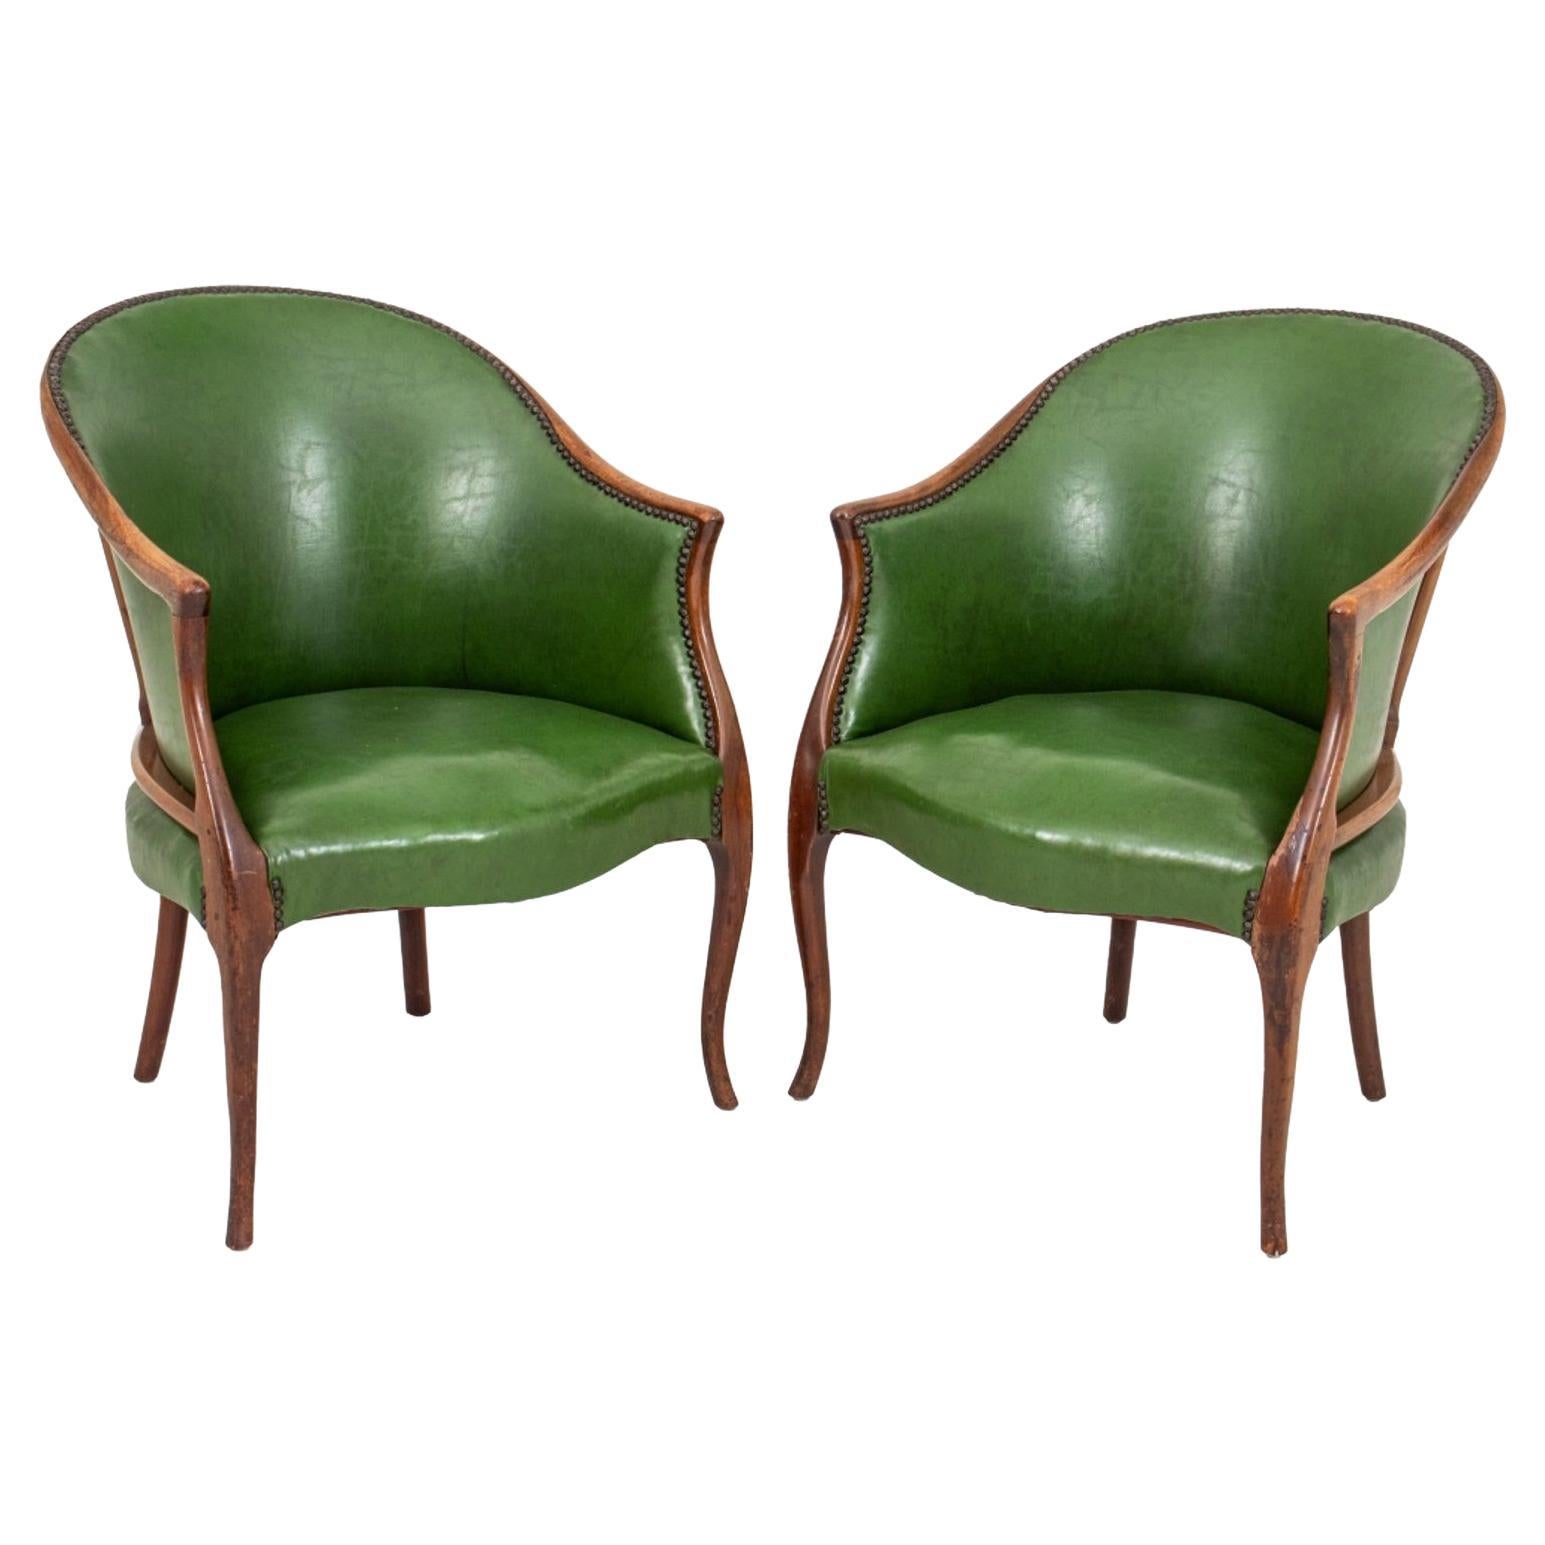 George III Style Leather Upholstered Games Chairs